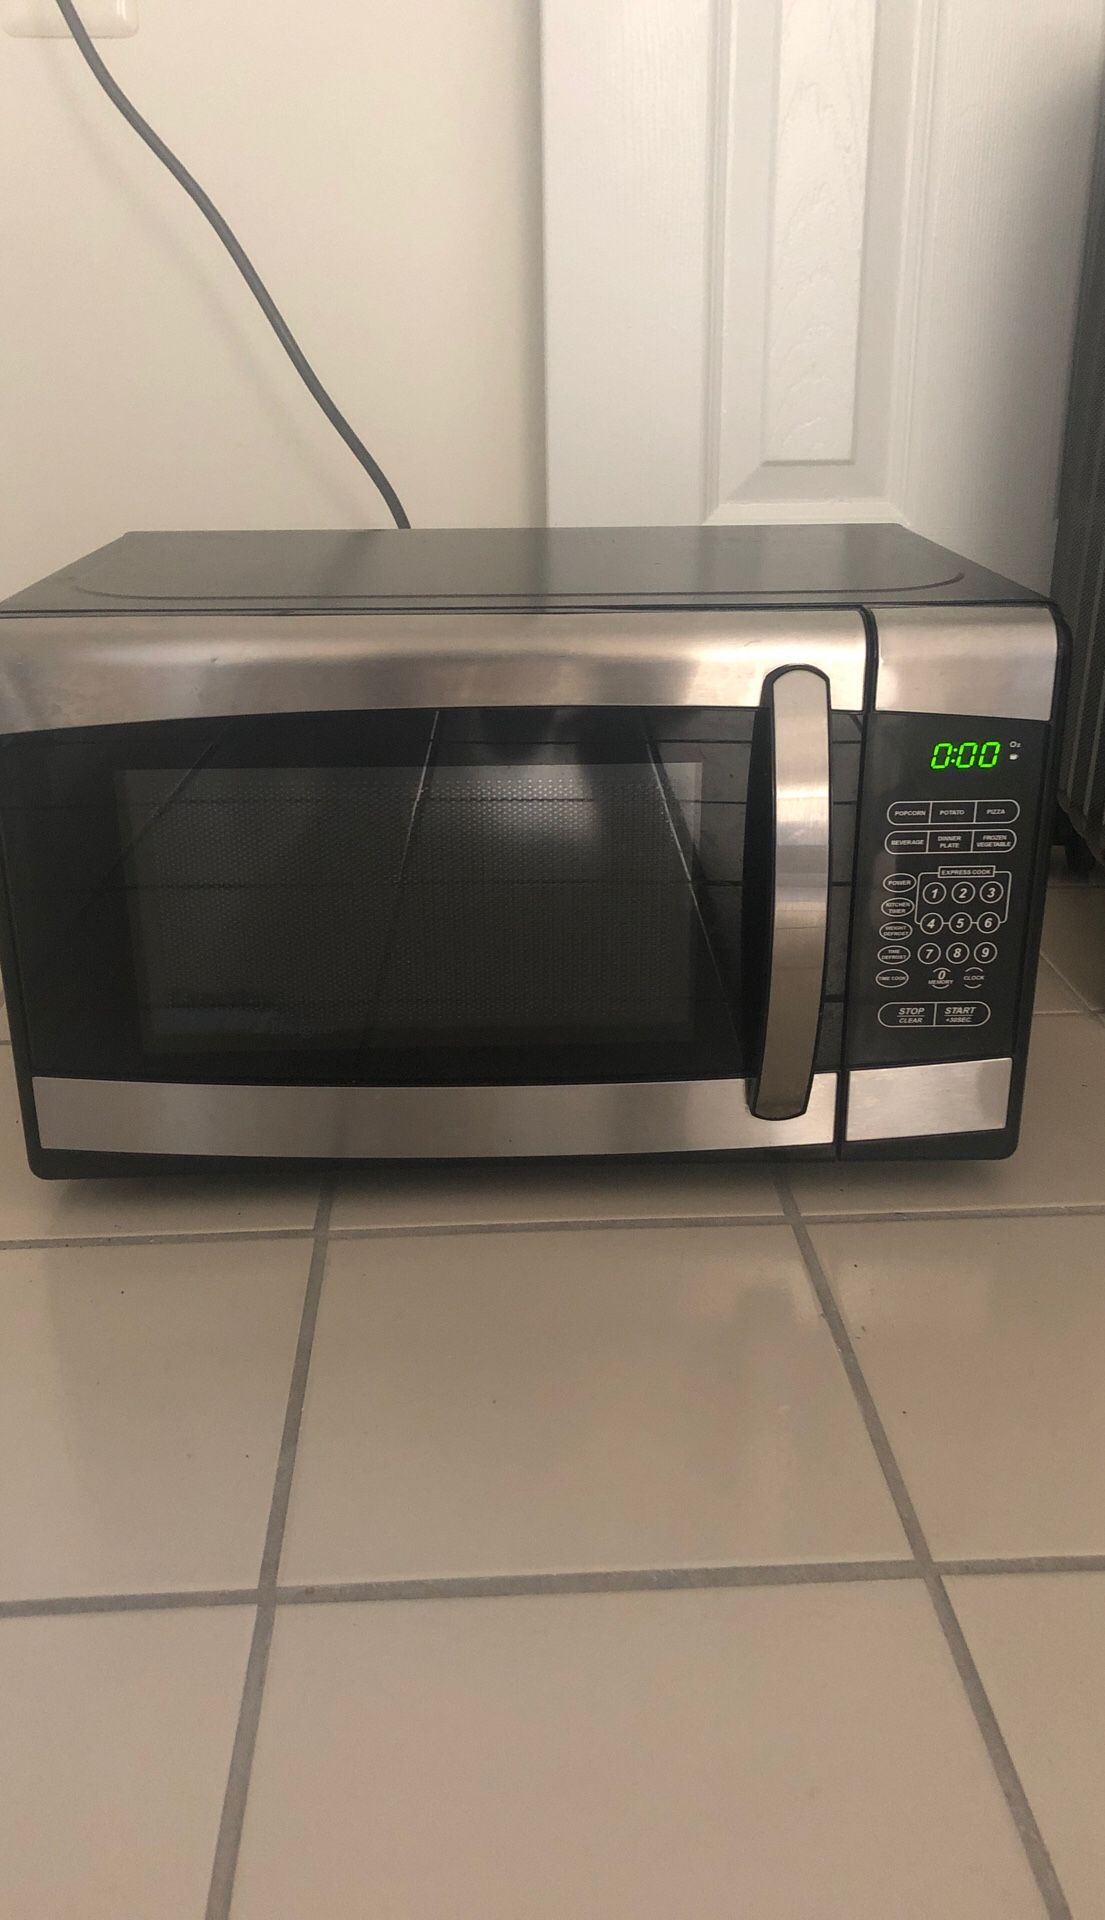 Barely Used Danby Microwave